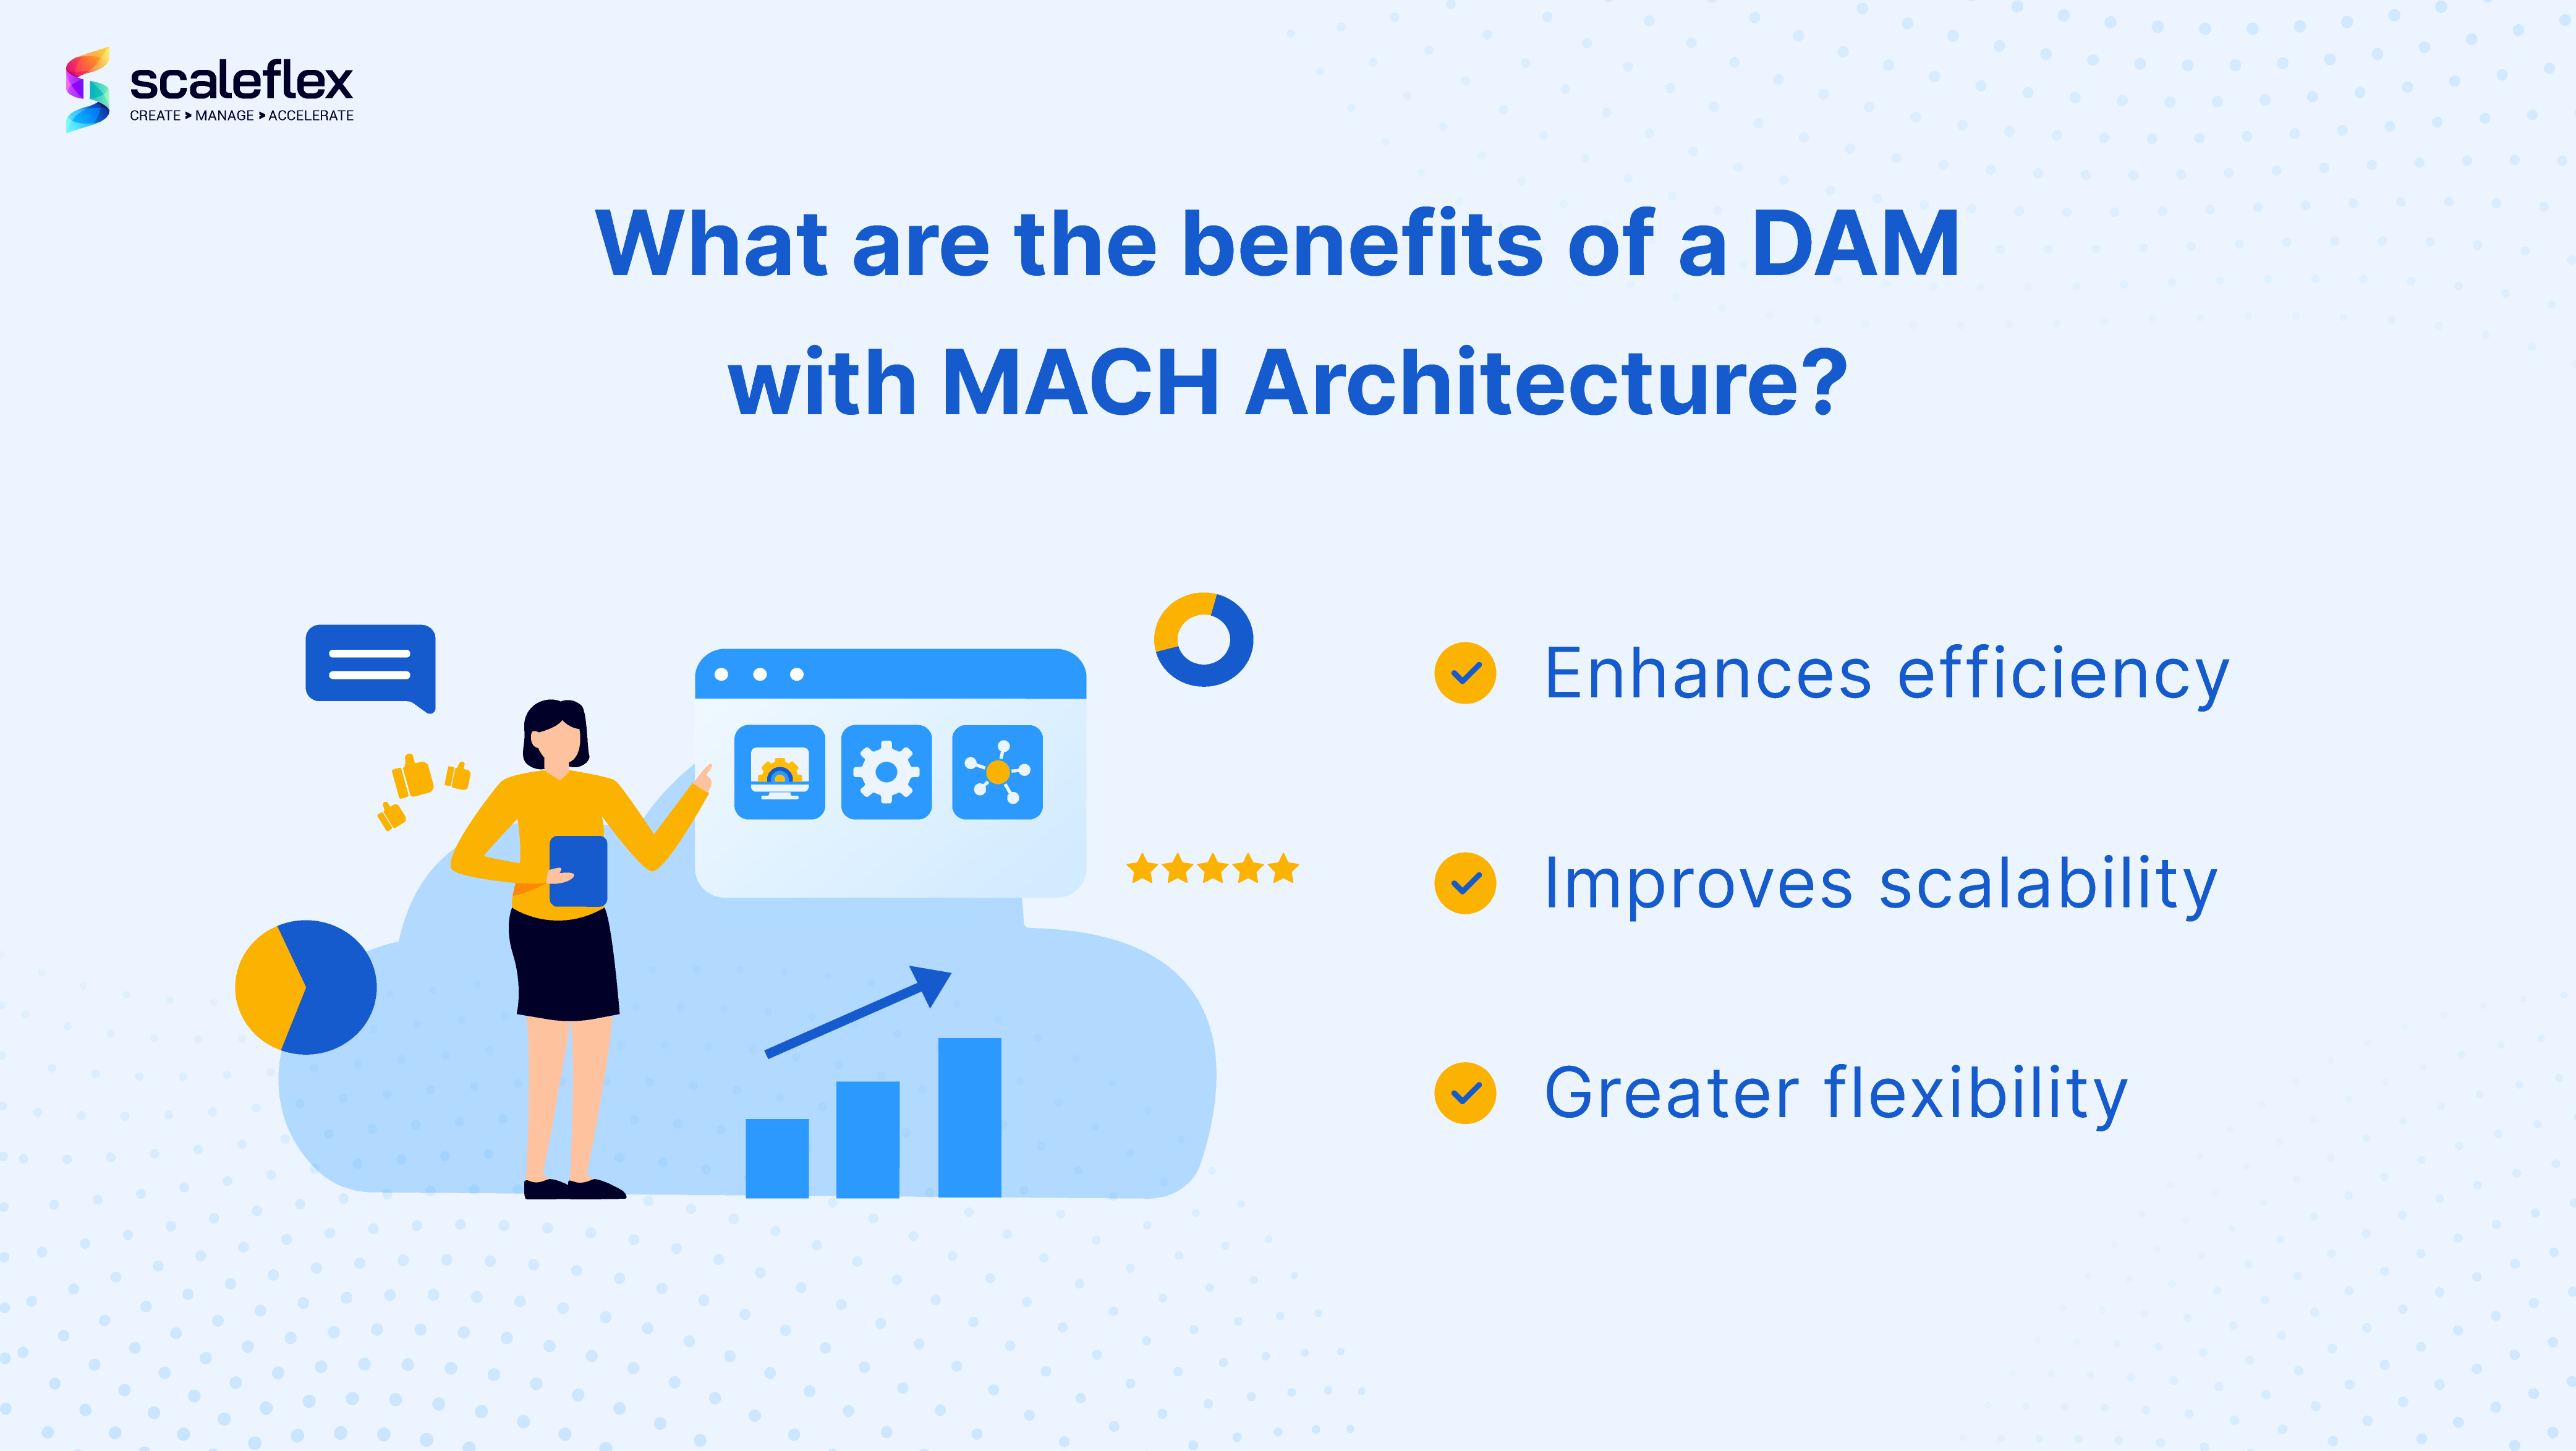 Benefits of DAM with MACH architecture